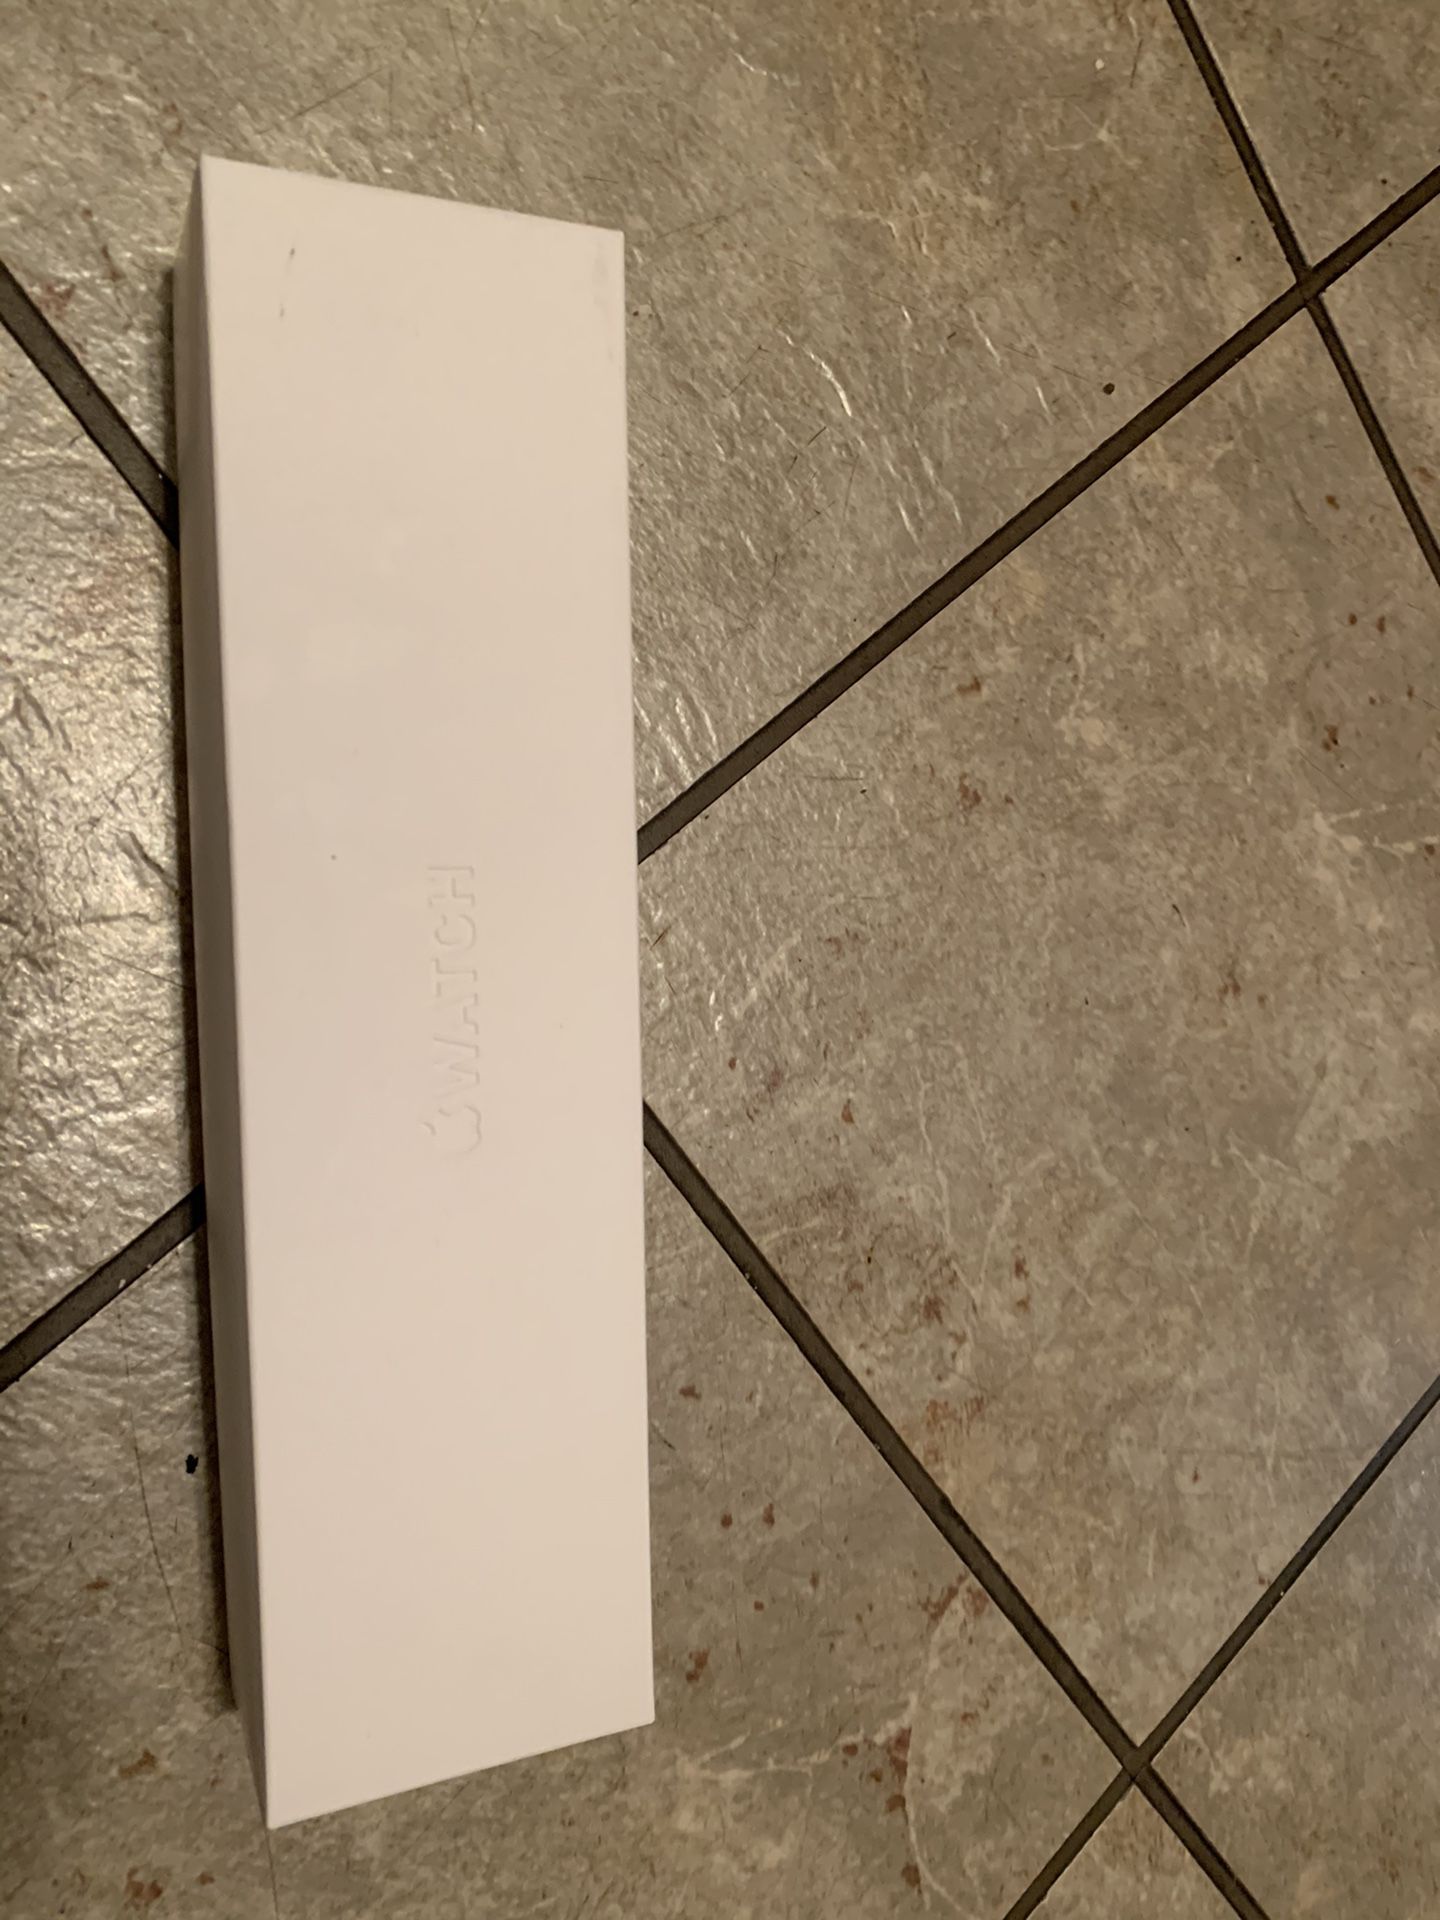 Apple Watch Series 5 Space Gray 40mm Face